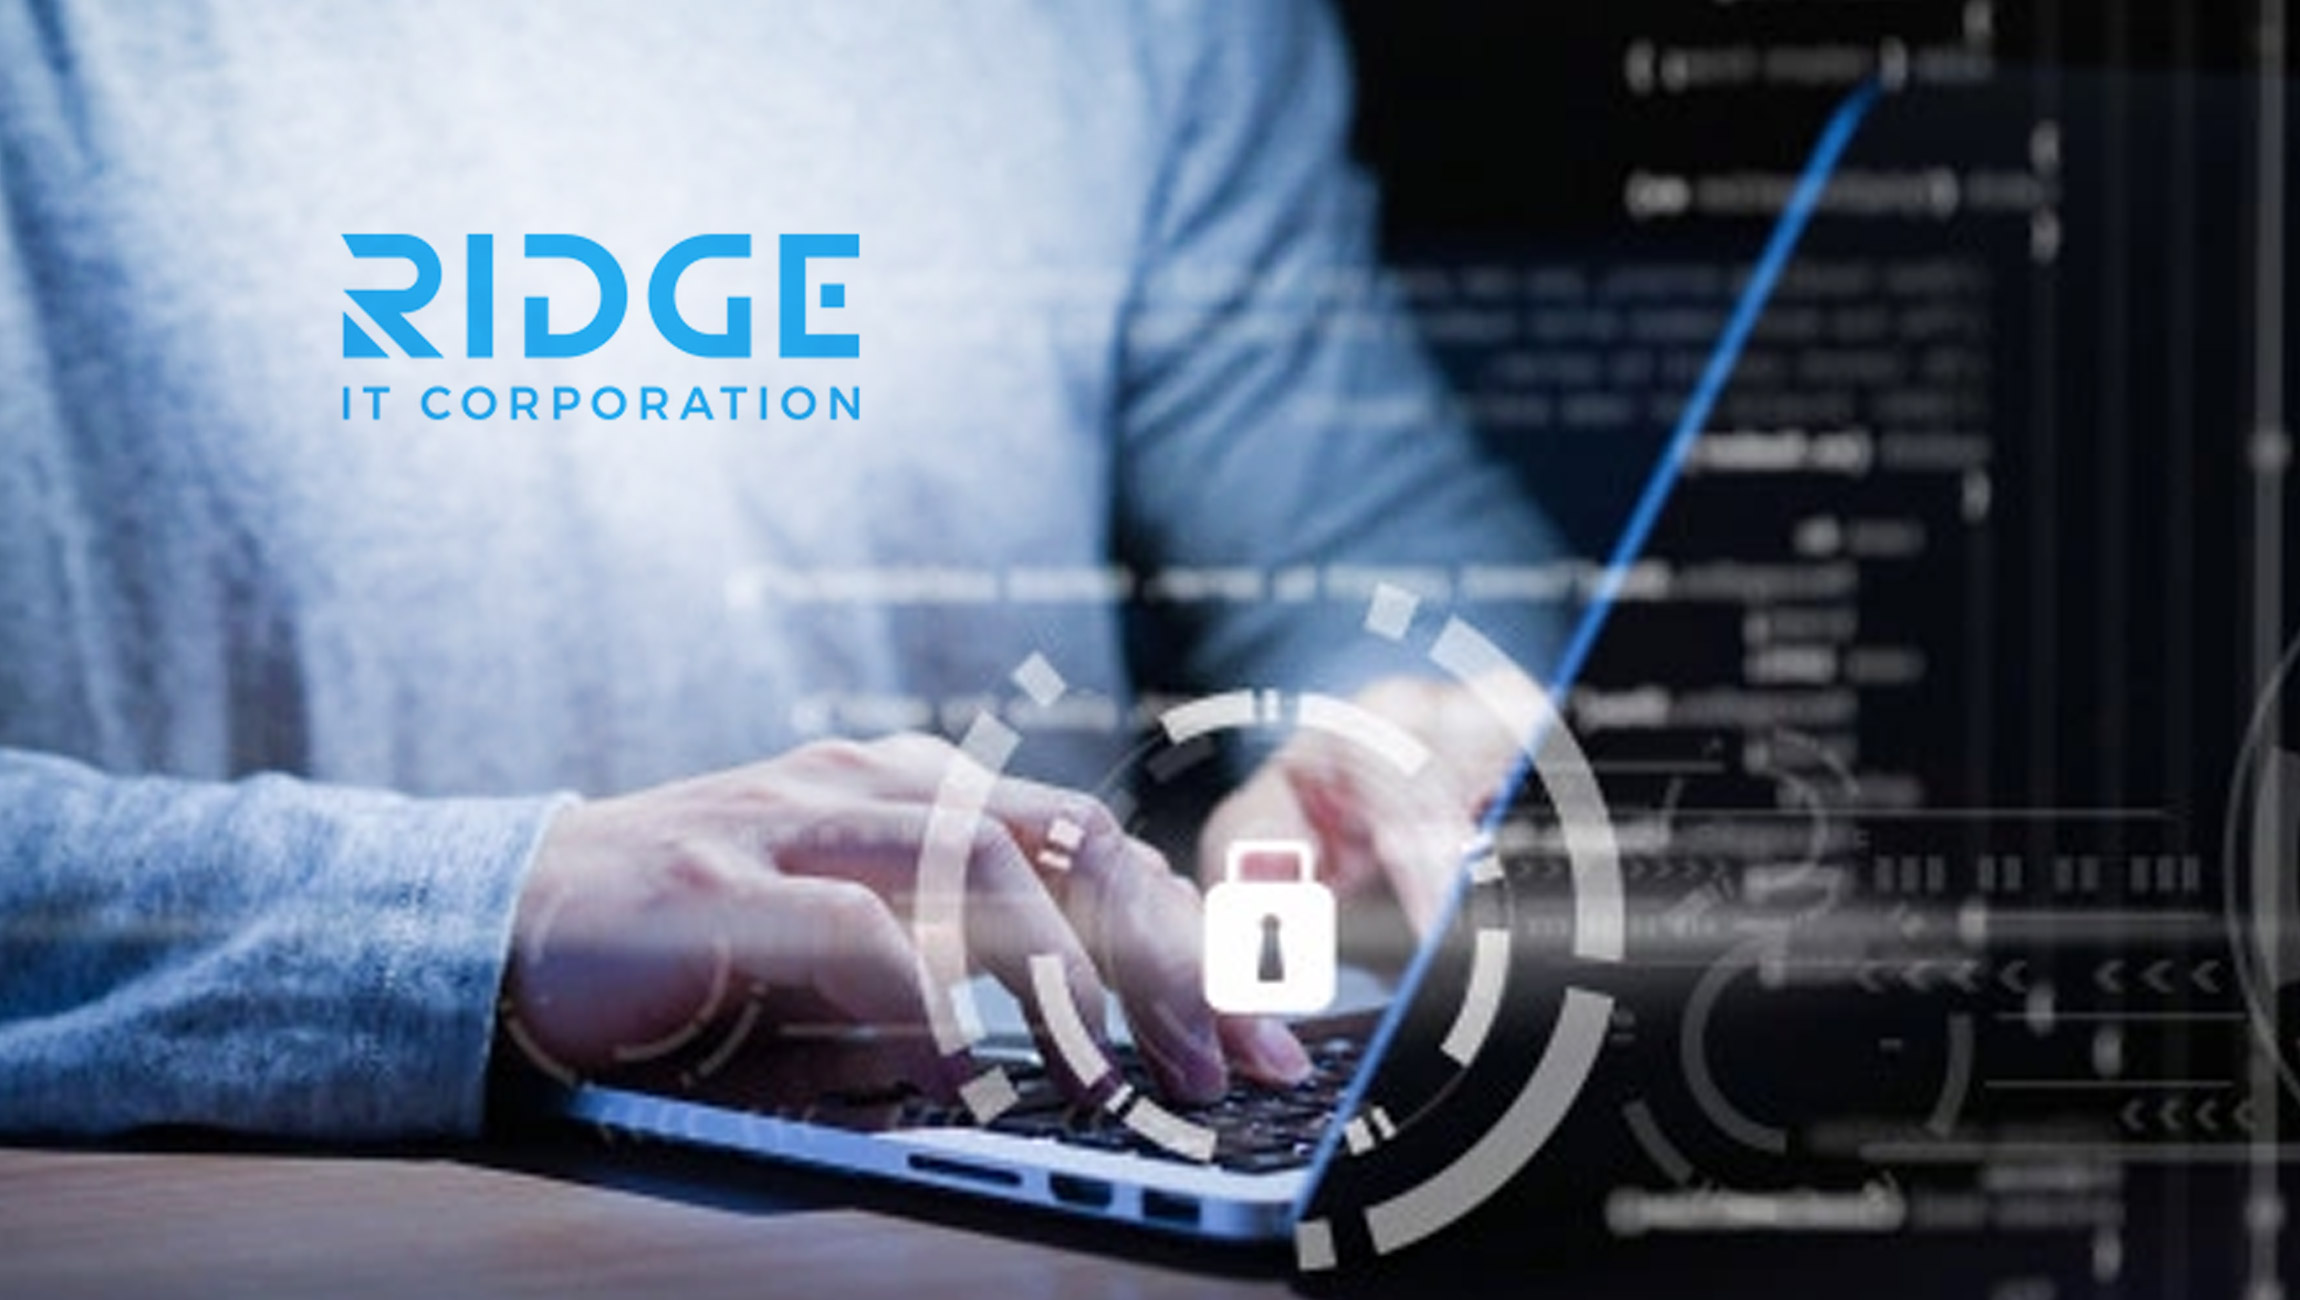 A-New-Era-of-Cybersecurity-Ridge-IT-Corporation-Named-Global-Services-Partner-of-the-Year-by-Zscaler